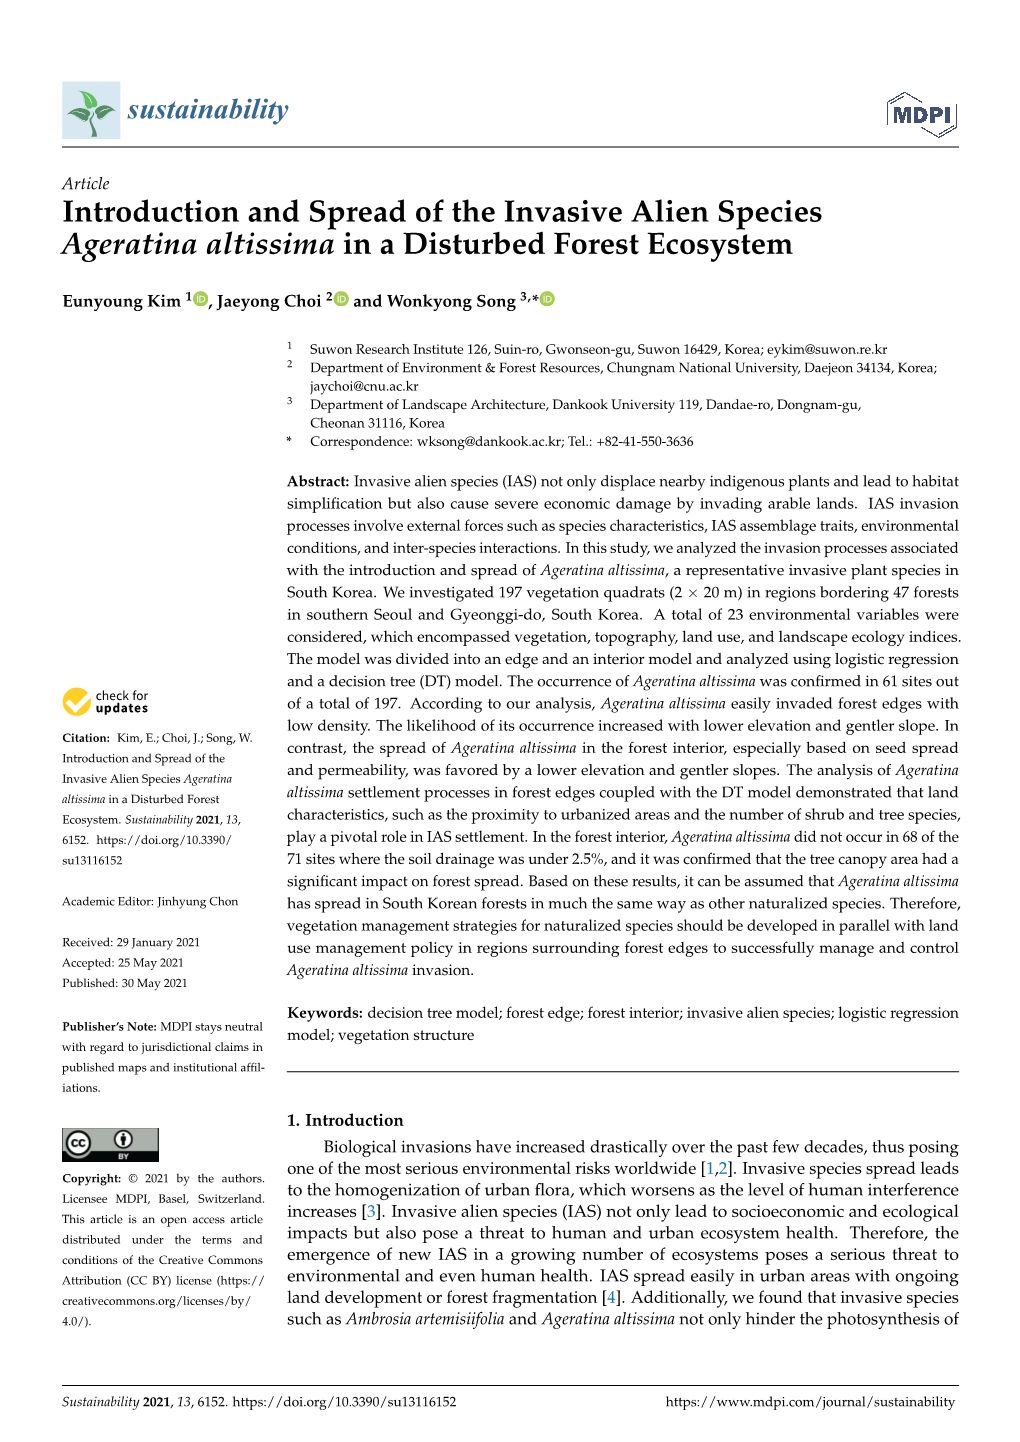 Introduction and Spread of the Invasive Alien Species Ageratina Altissima in a Disturbed Forest Ecosystem